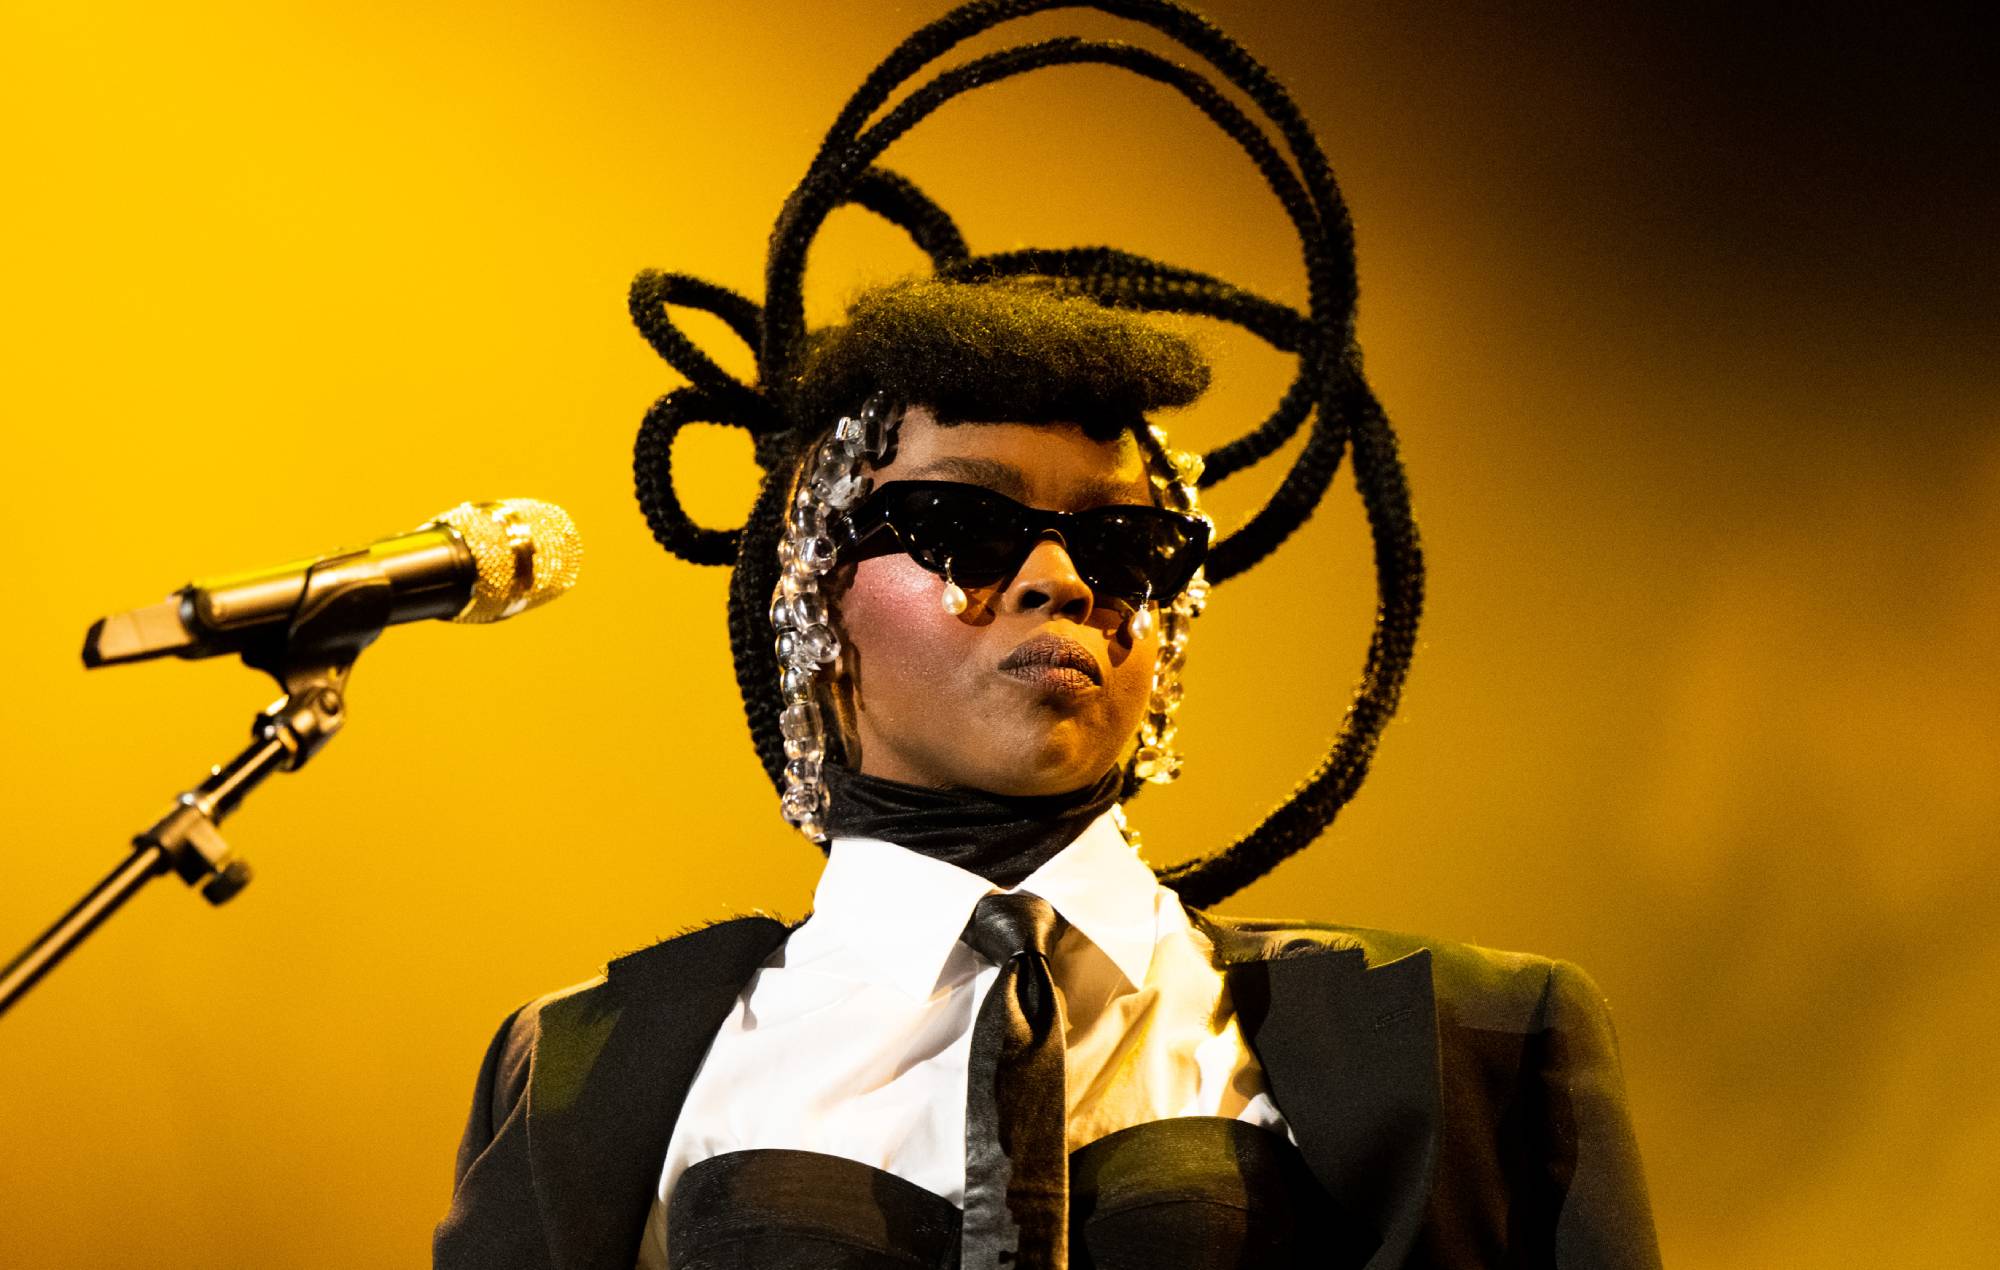 Lauryn Hill says fans are “lucky” she made it on stage after cancelled shows